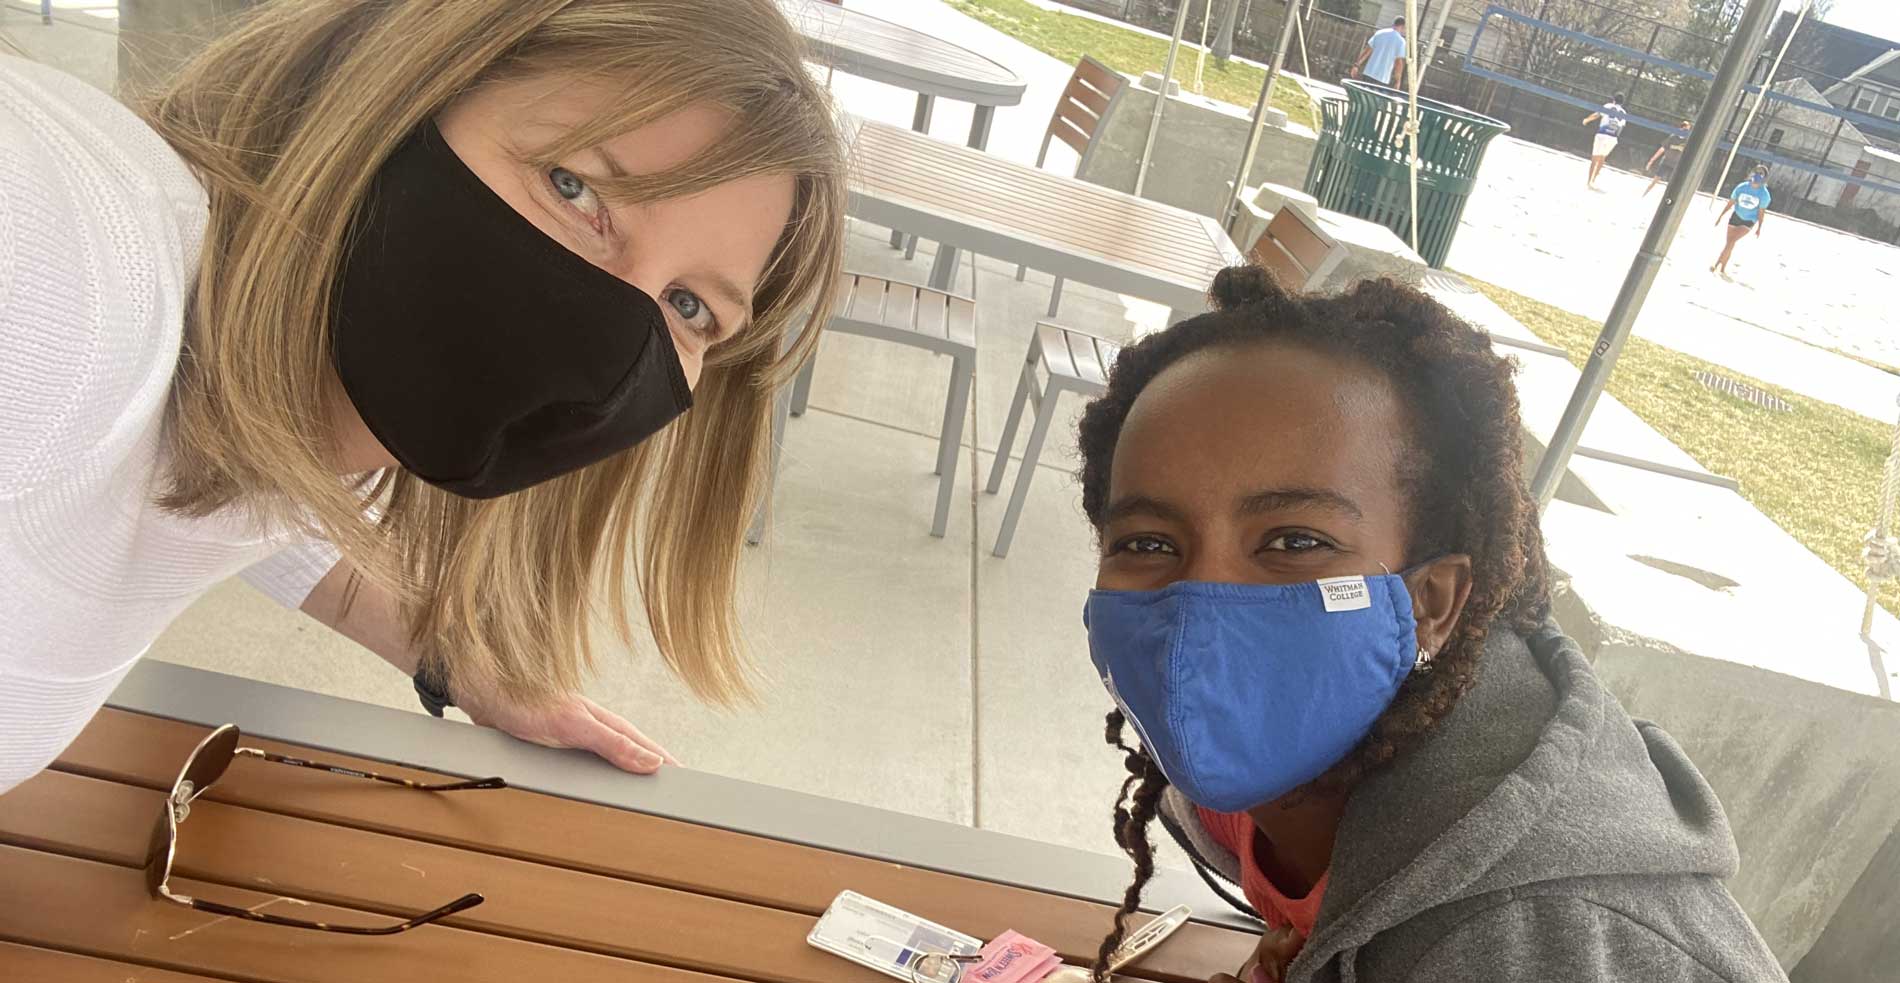 Stacy Wamuchii and Kristen Adams Gabel with Covid mask ons